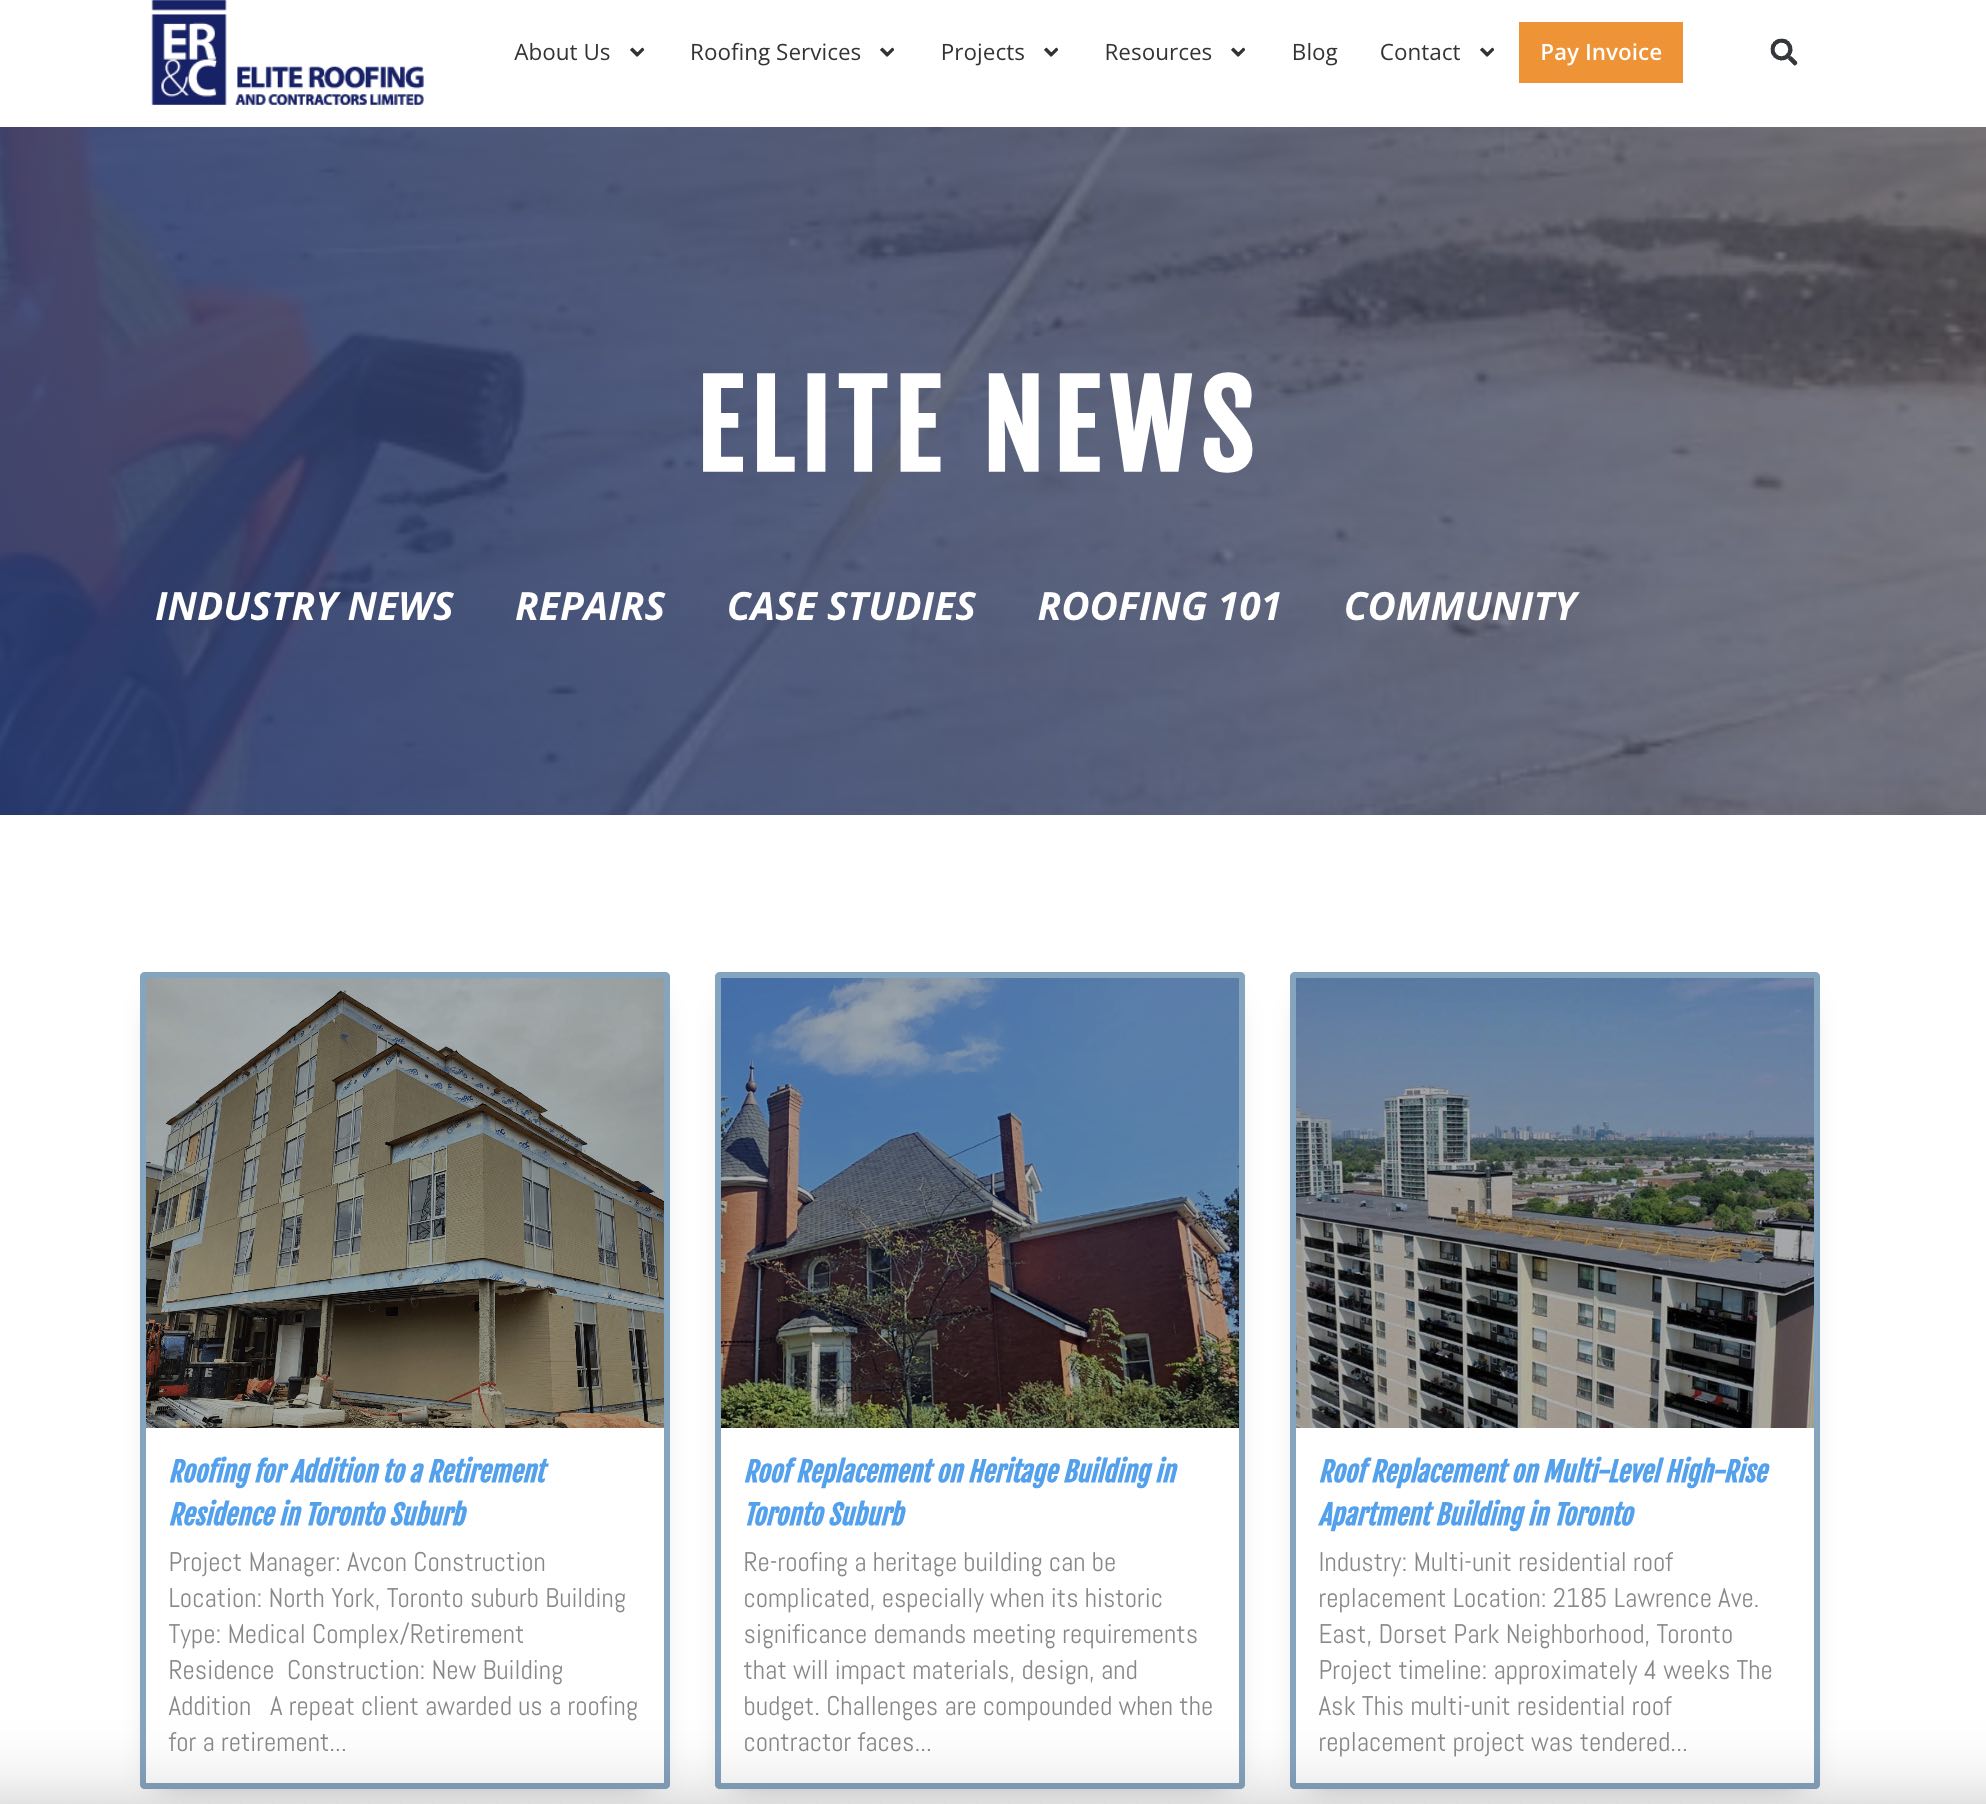 Take a look at some of Elite Roofing's past industrial, commercial, and residential roofing project case studies.